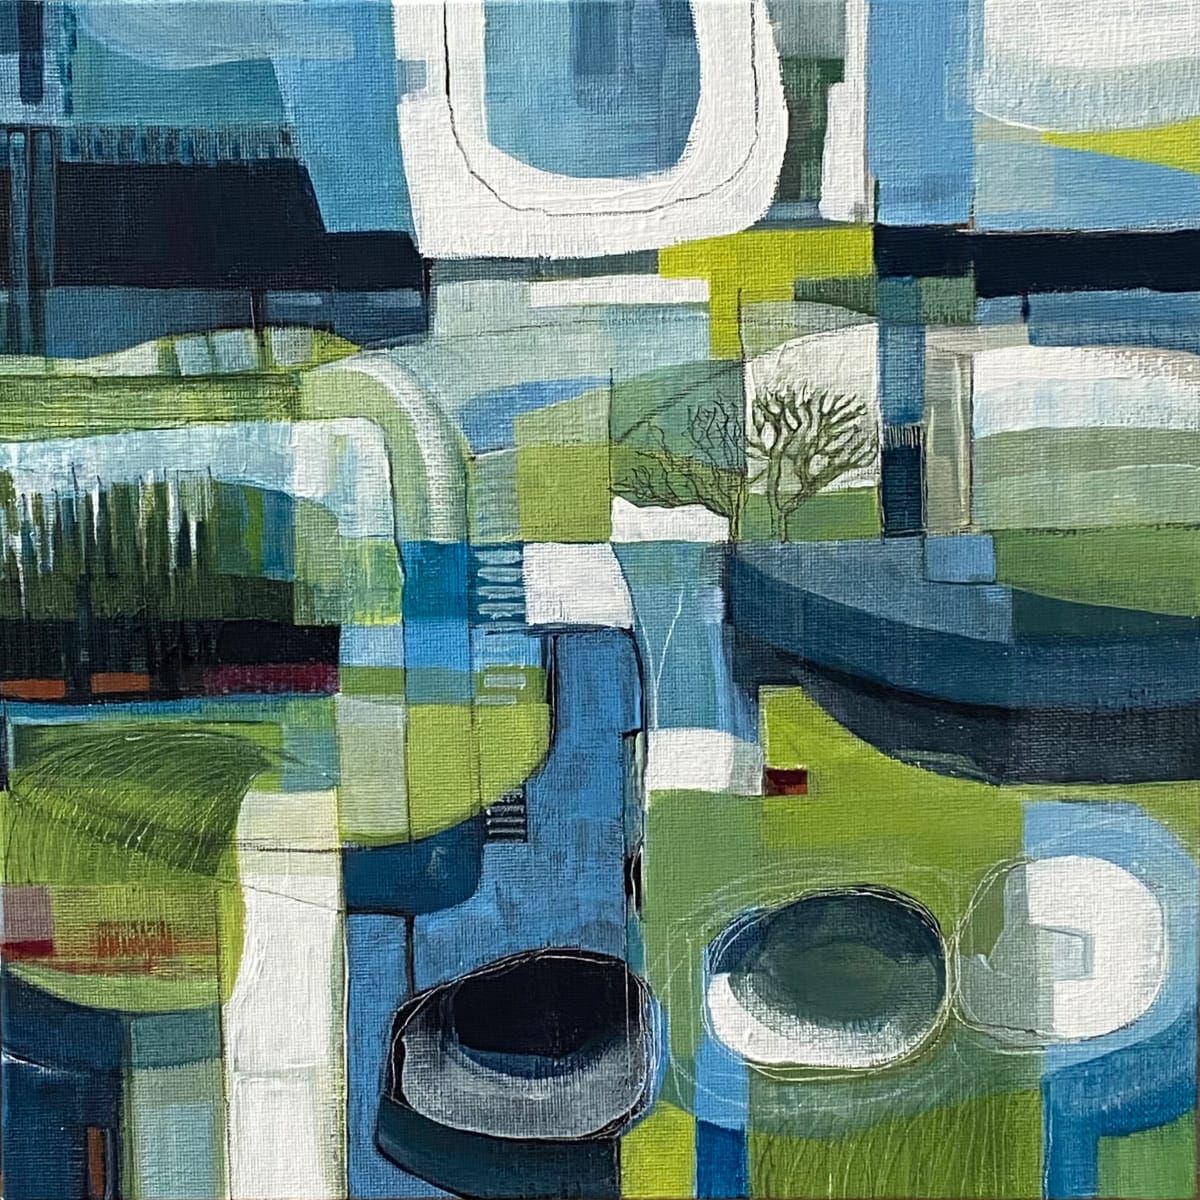 A Place Among The Stones by Jo York  Image: A Place Among the Stones: A painting about walking the high fields with scrubby trees, dry stone walls and scudding clouds, in a fresh spring like palette